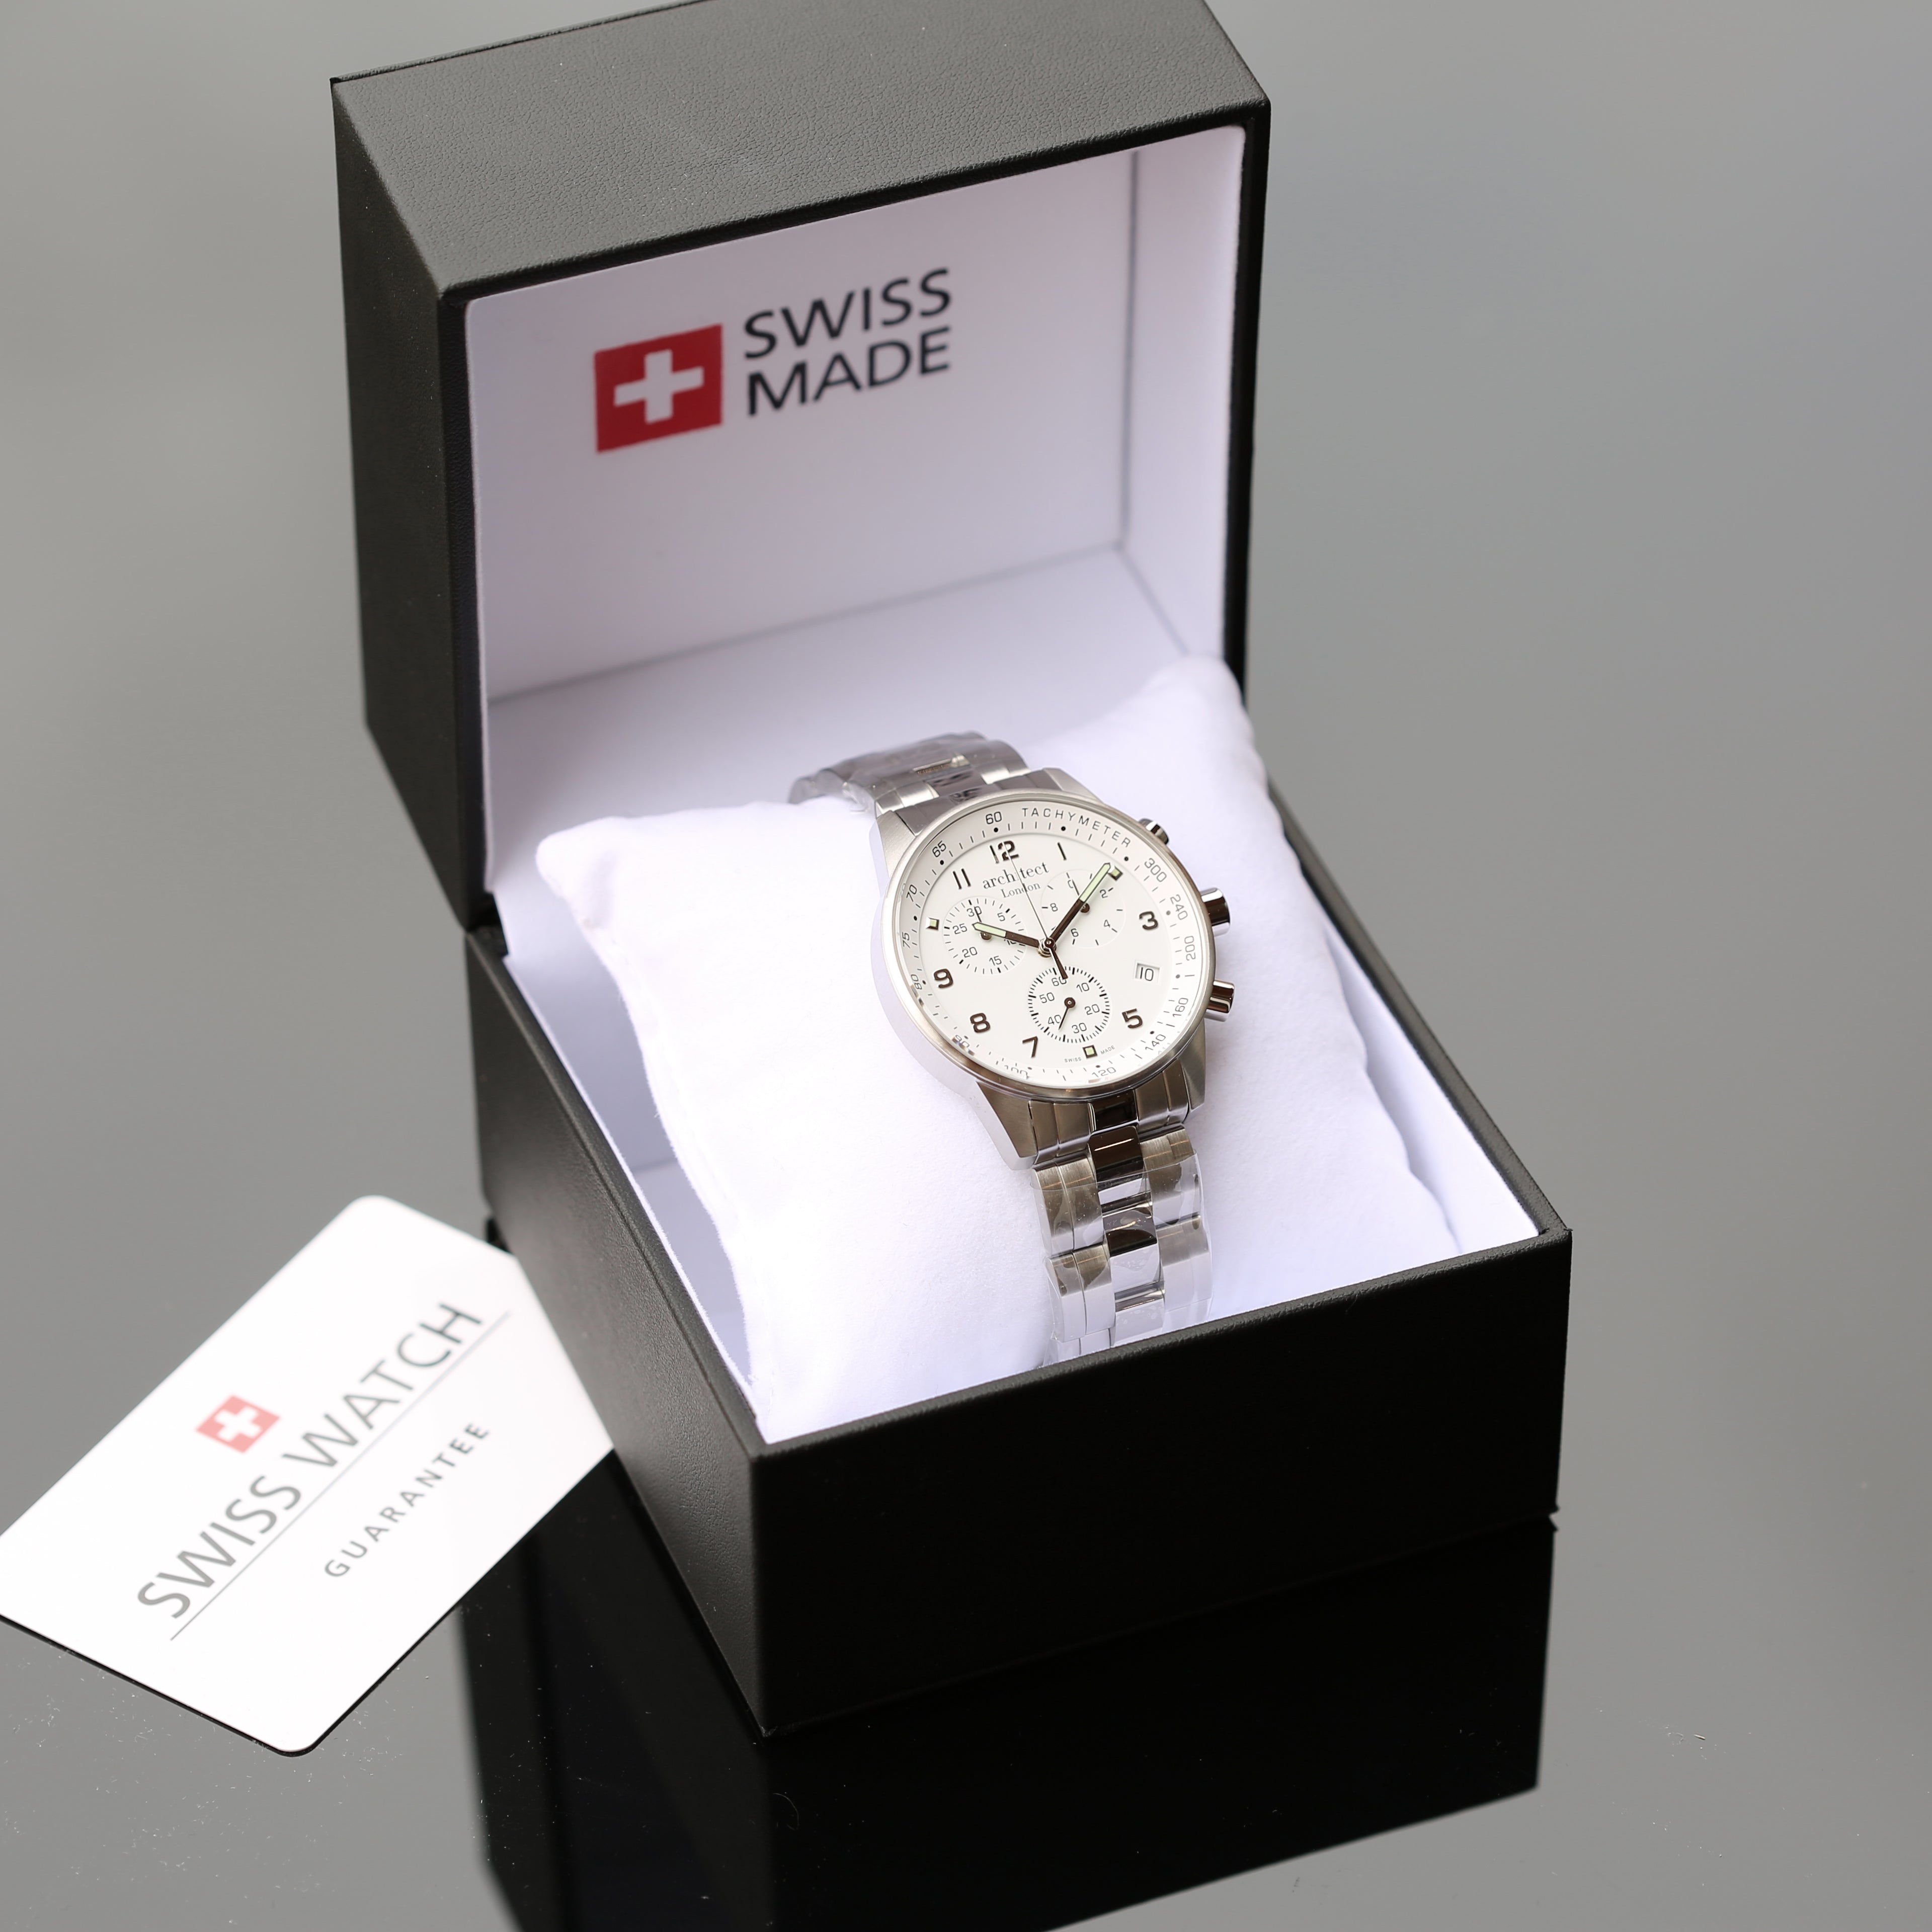 Why Swiss made personalised watches?